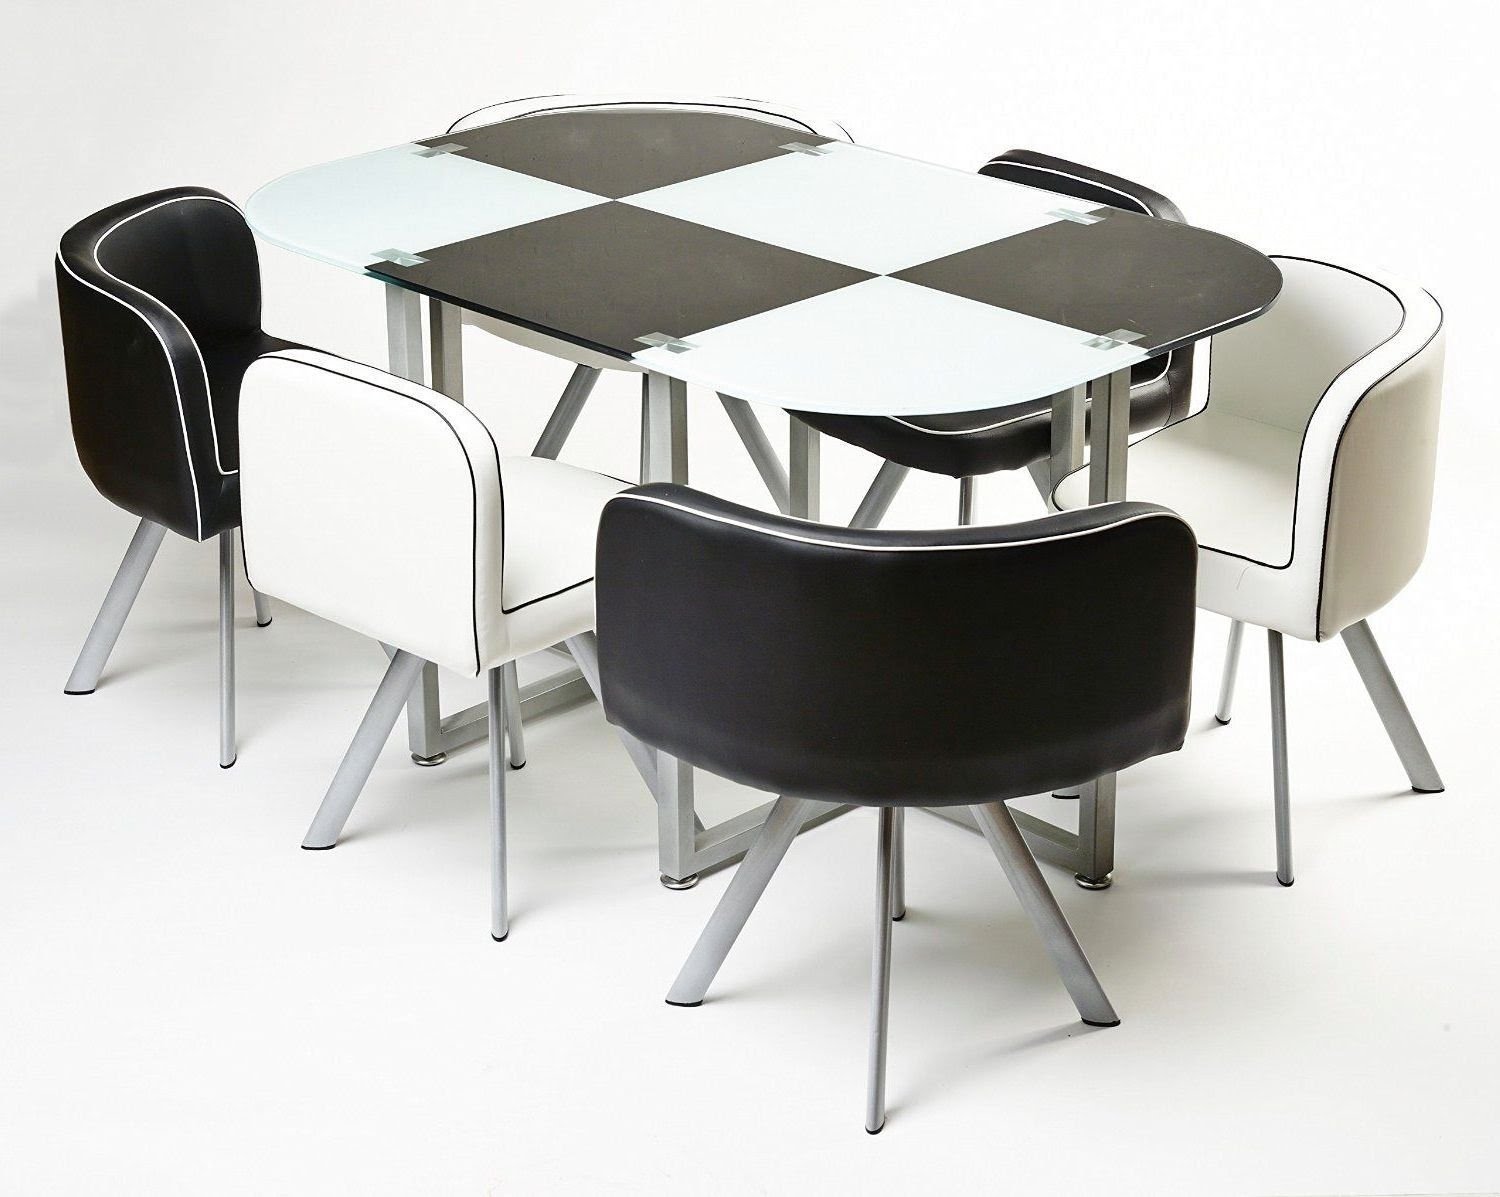 50 Amazing Space Saving Dining Table, Round Space Saver Table And Chairs Ikea Singapore